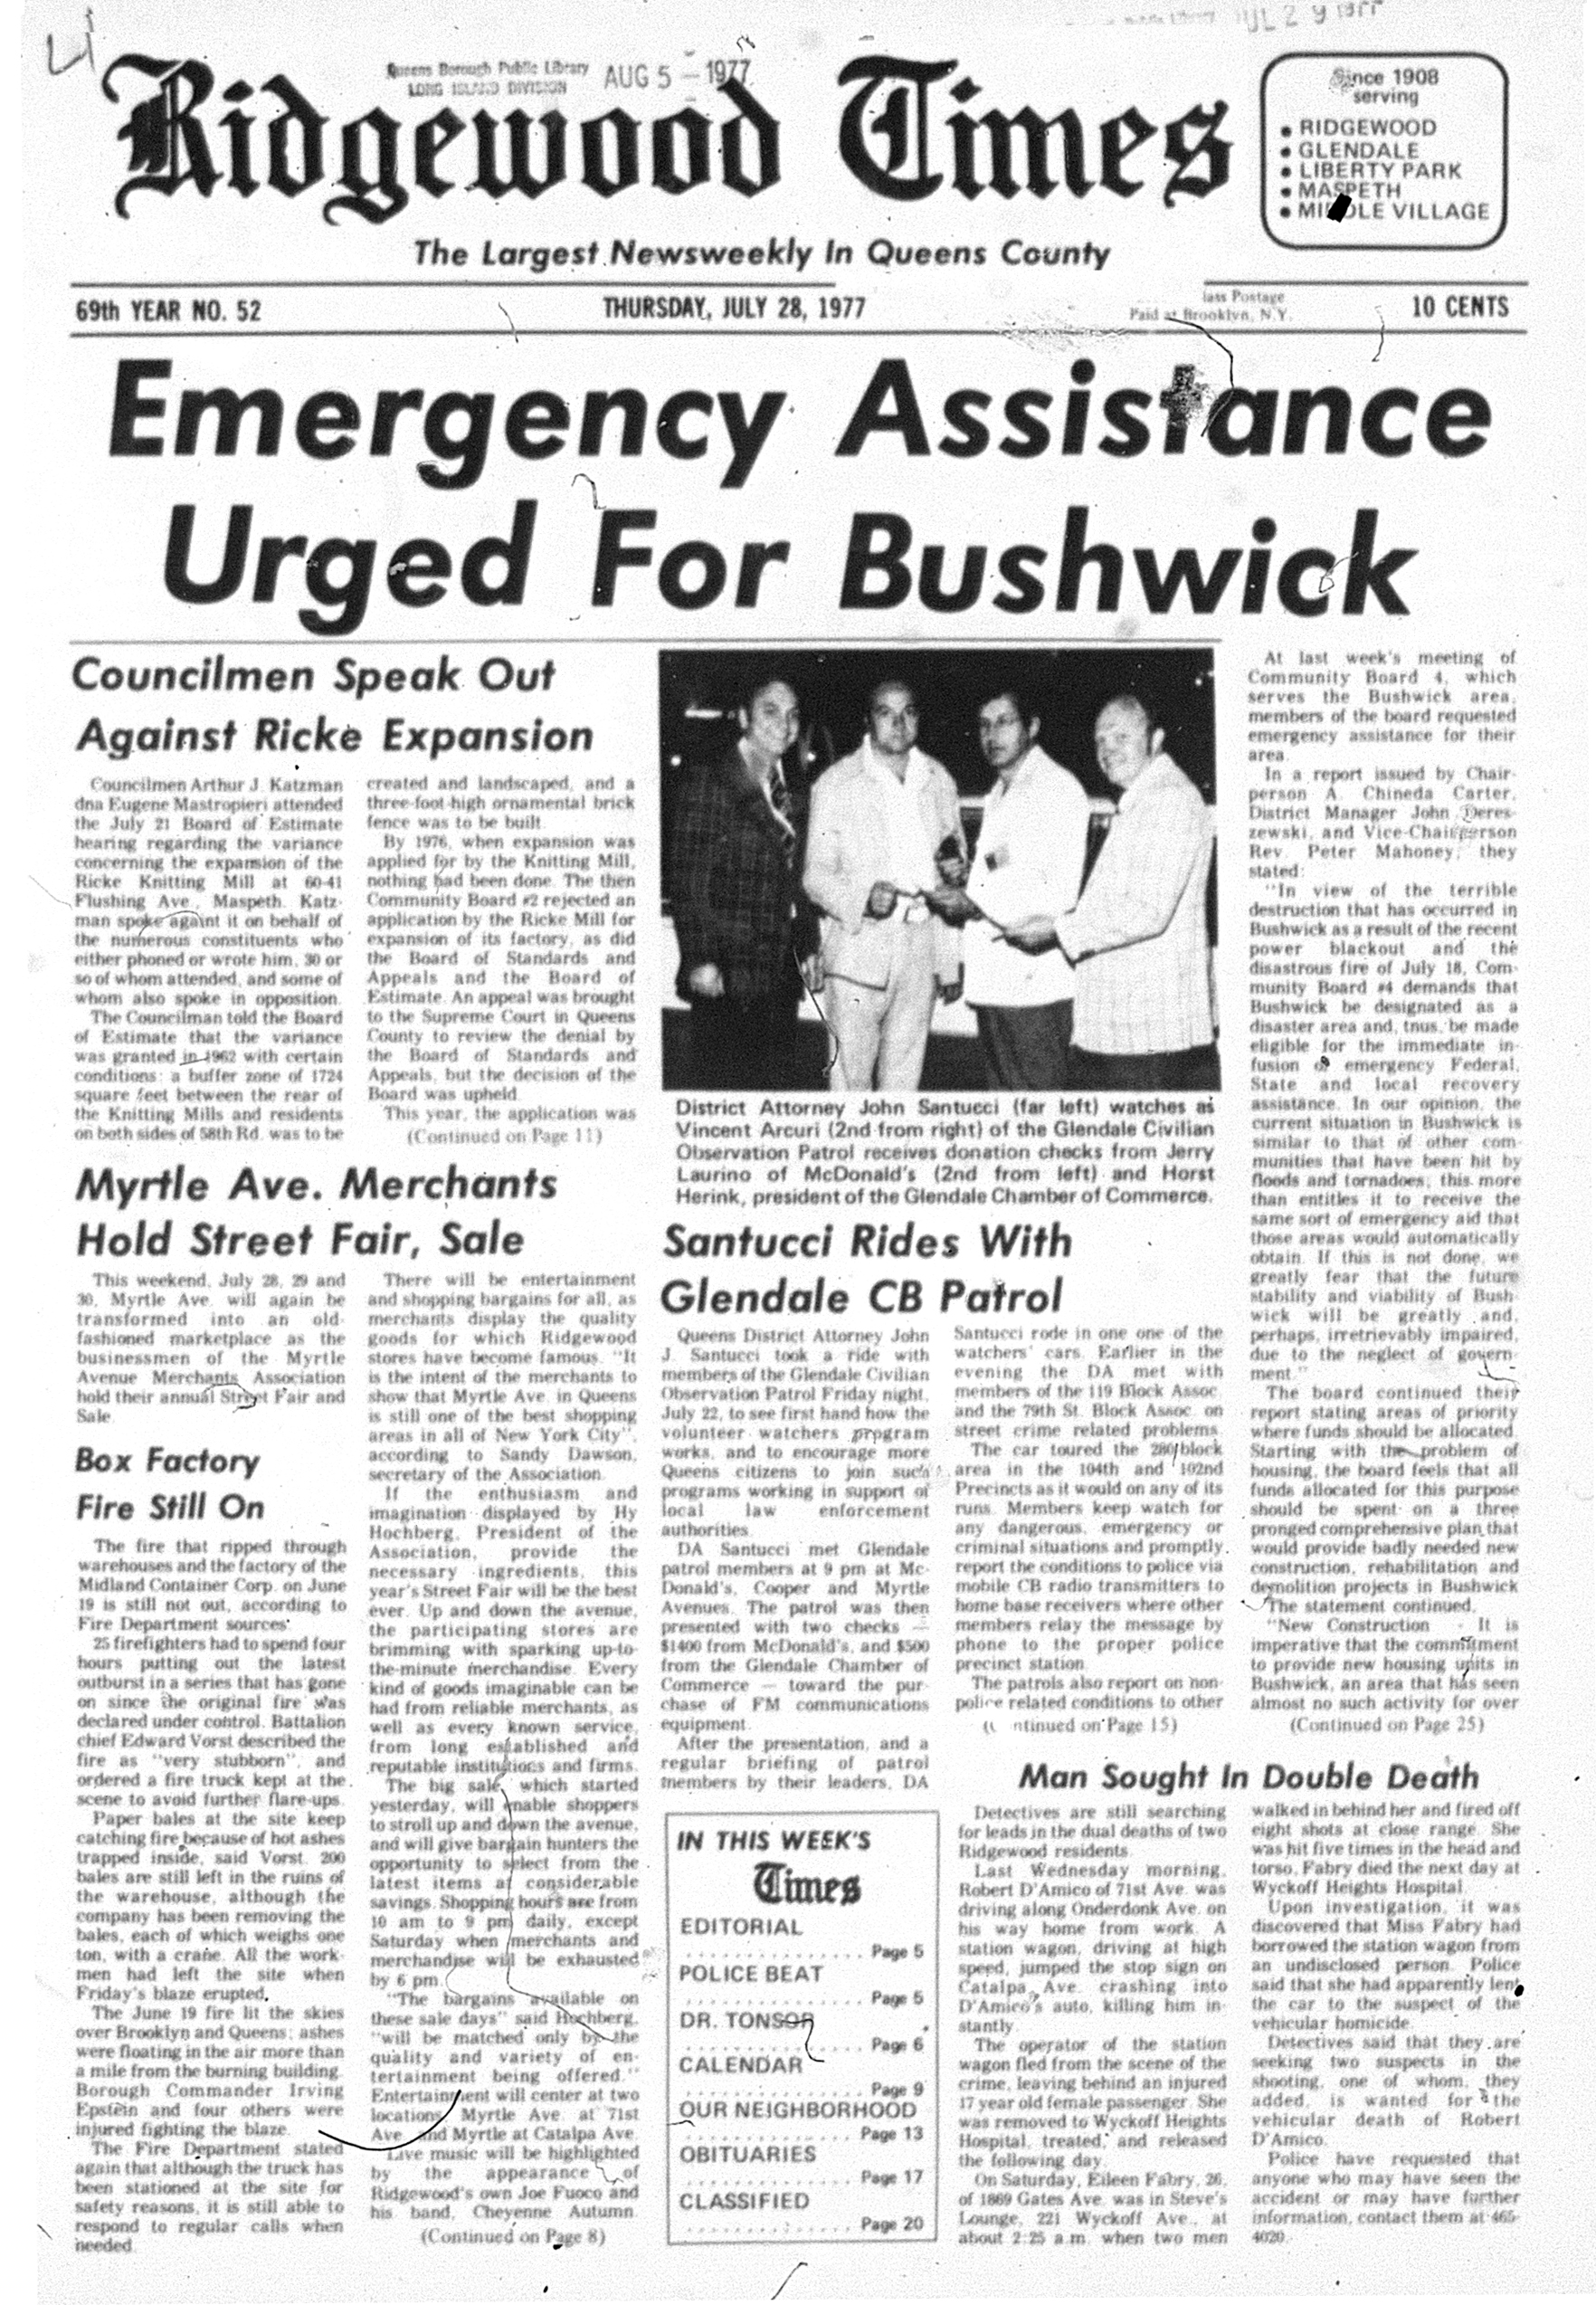 The front page of the July 28, 1977 Ridgewood Times documented not only the need for emergency assistance in arson-scorched Bushwick, but also the efforts of the Glendale Civilian Observation Patrol, a neighborhood watch program which provided help to local police during a trying time for New York City.